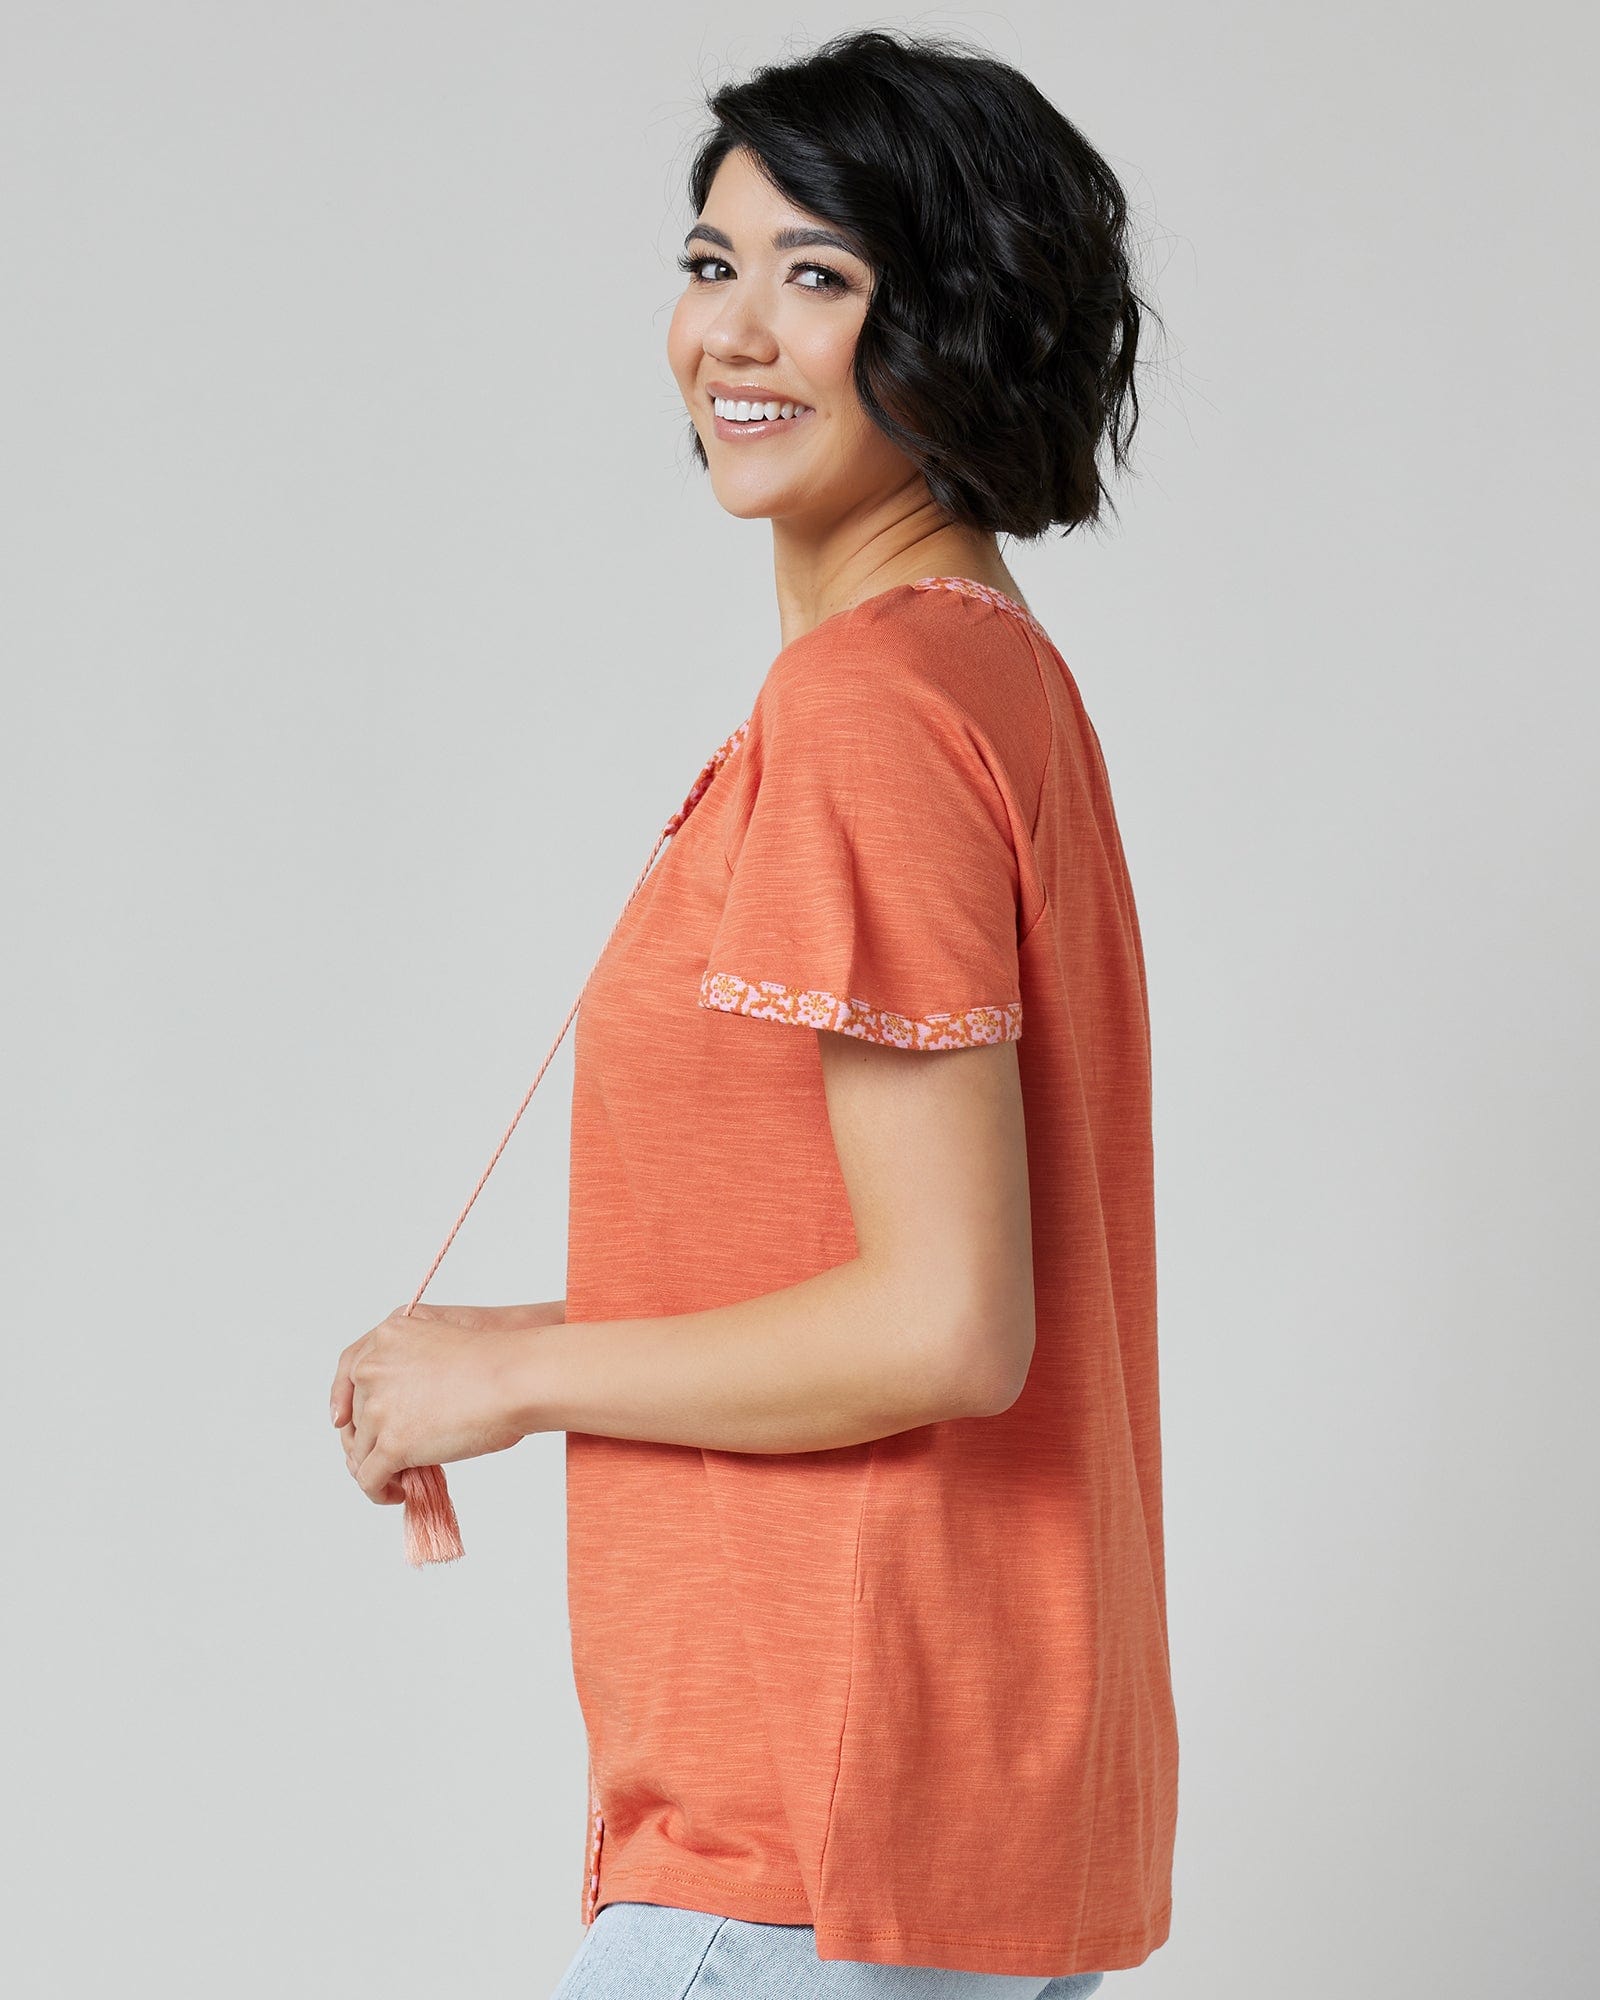 Woman in an orange top with short sleeves and buttons down the front